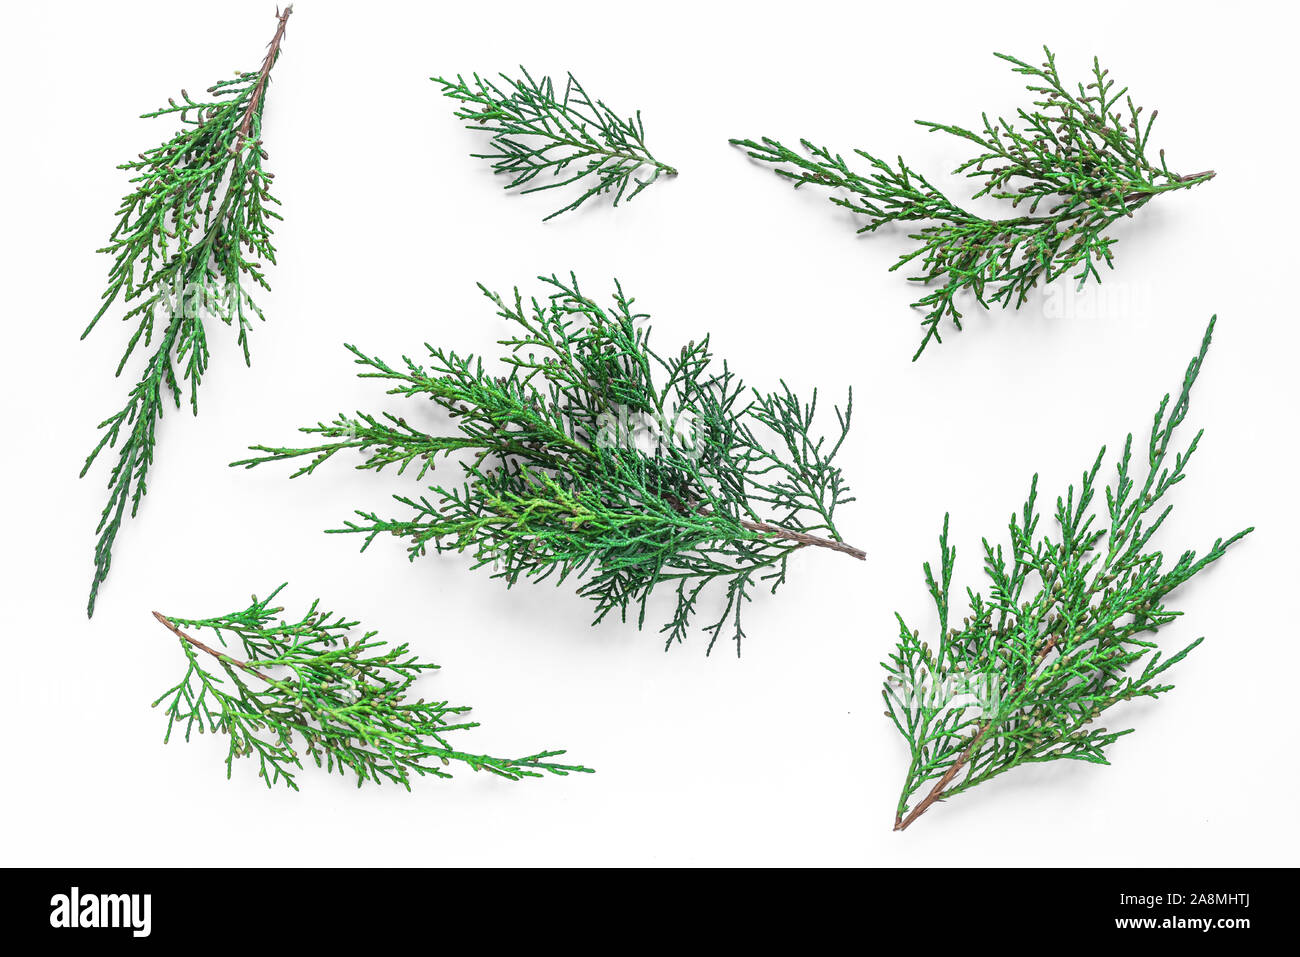 Thuja evergreen plant branches collection on white background. Stock Photo